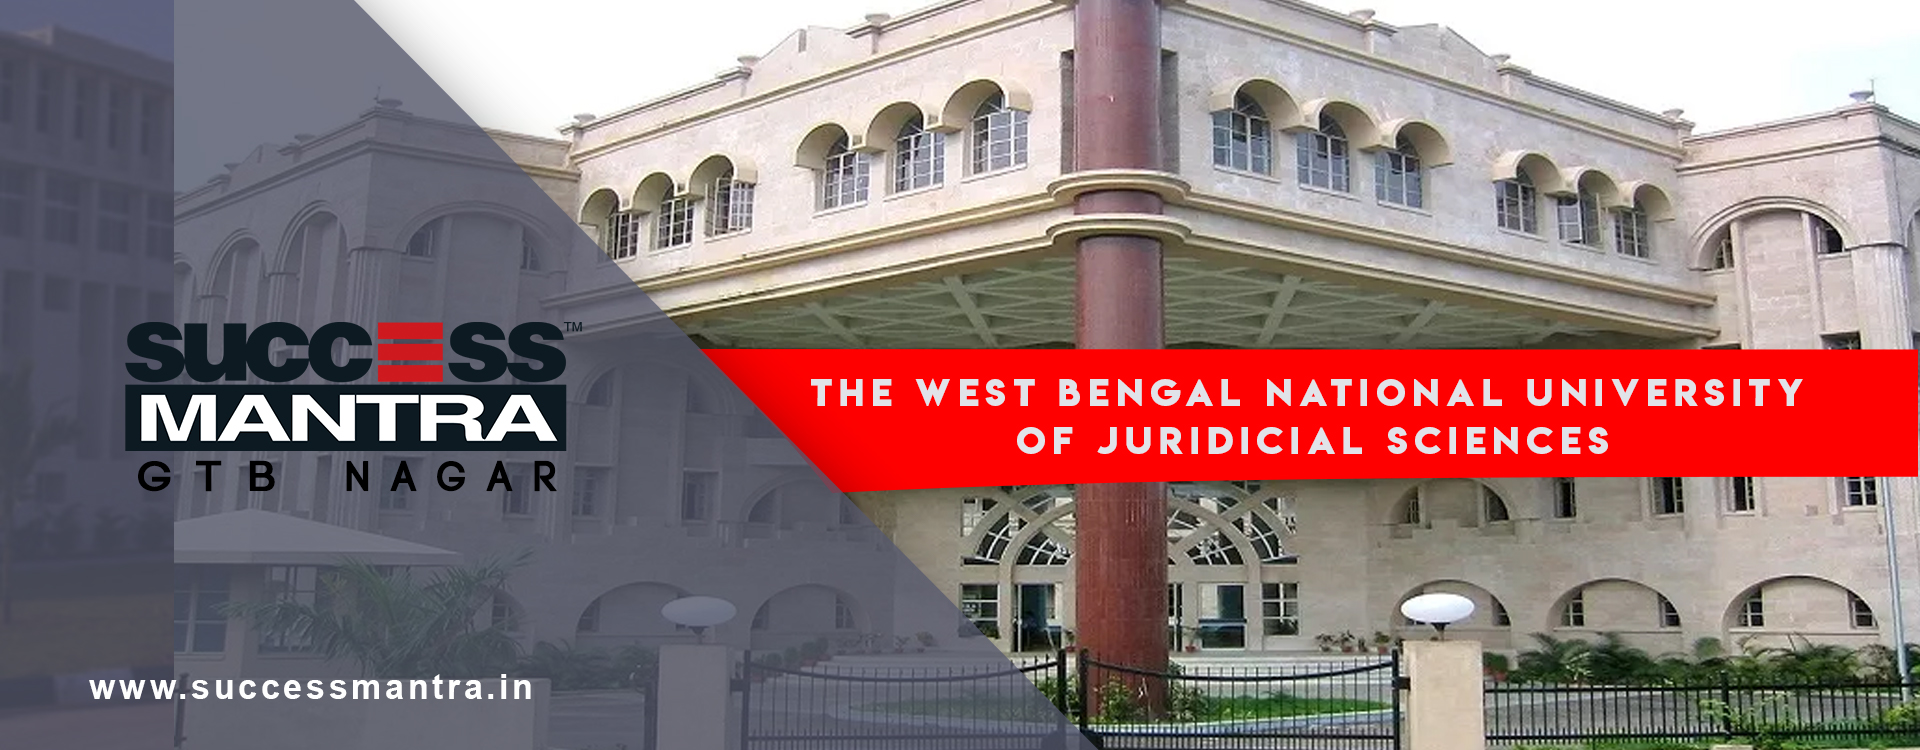 All About The West Bengal National University Of Juridical Sciences Nlu Kolkatta Success